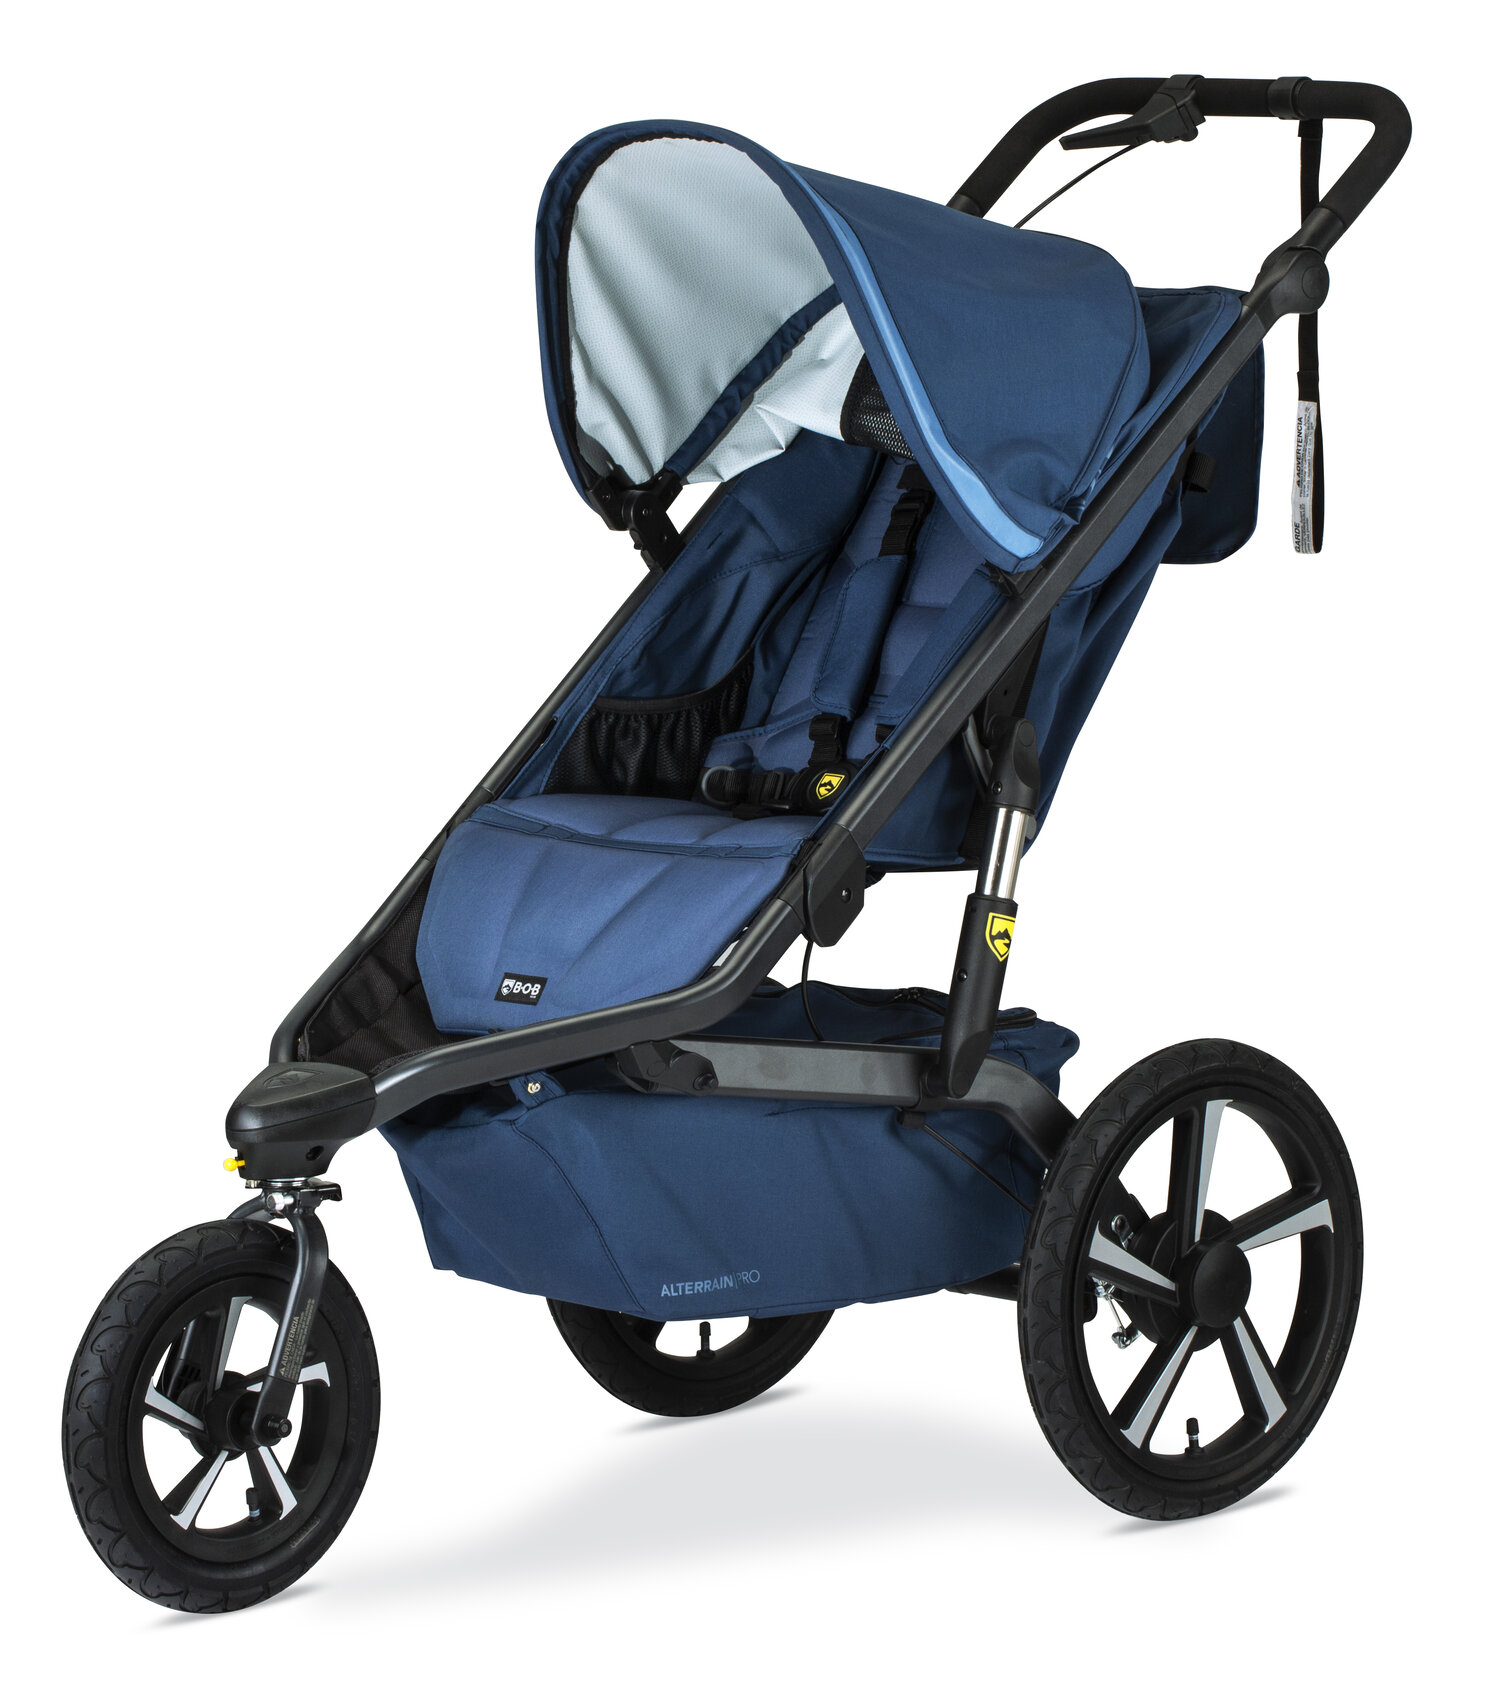 2019 new strollers